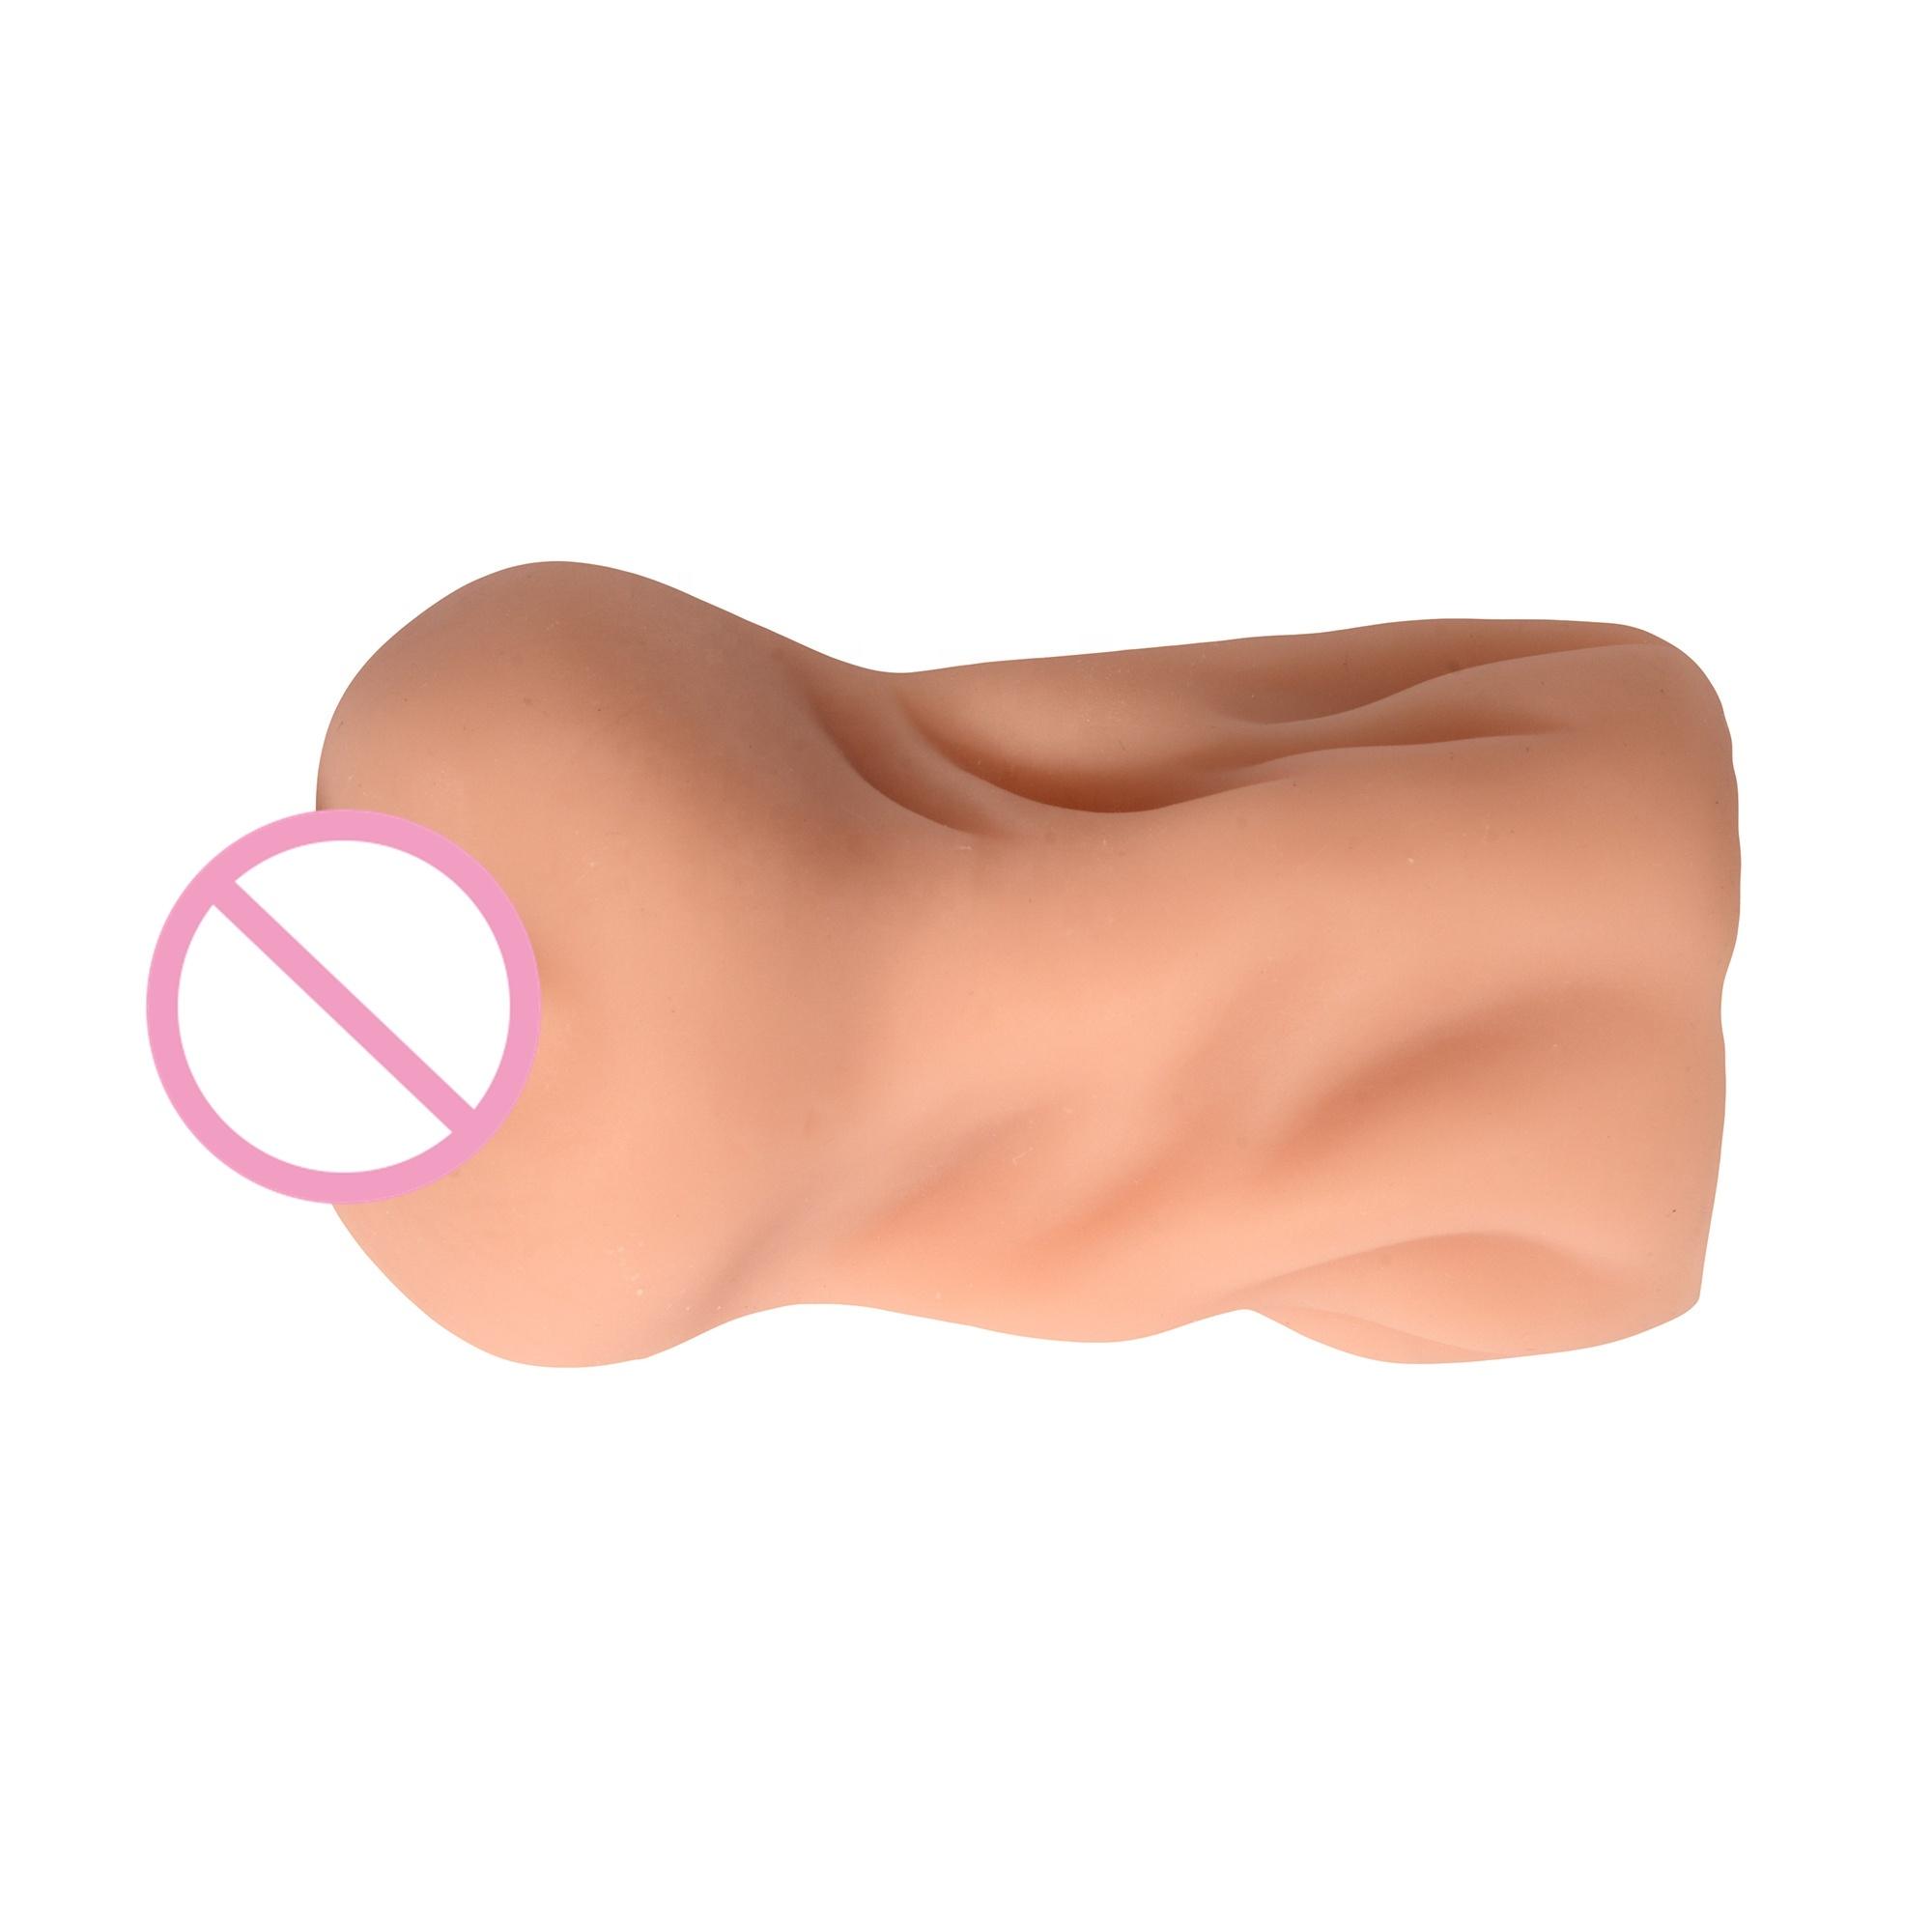  Soft Sex Doll Masturbator With Textured Tight Anus And Mouth Vagina Deep Throat Realistic Real Mini Adult Sex Toys For Men